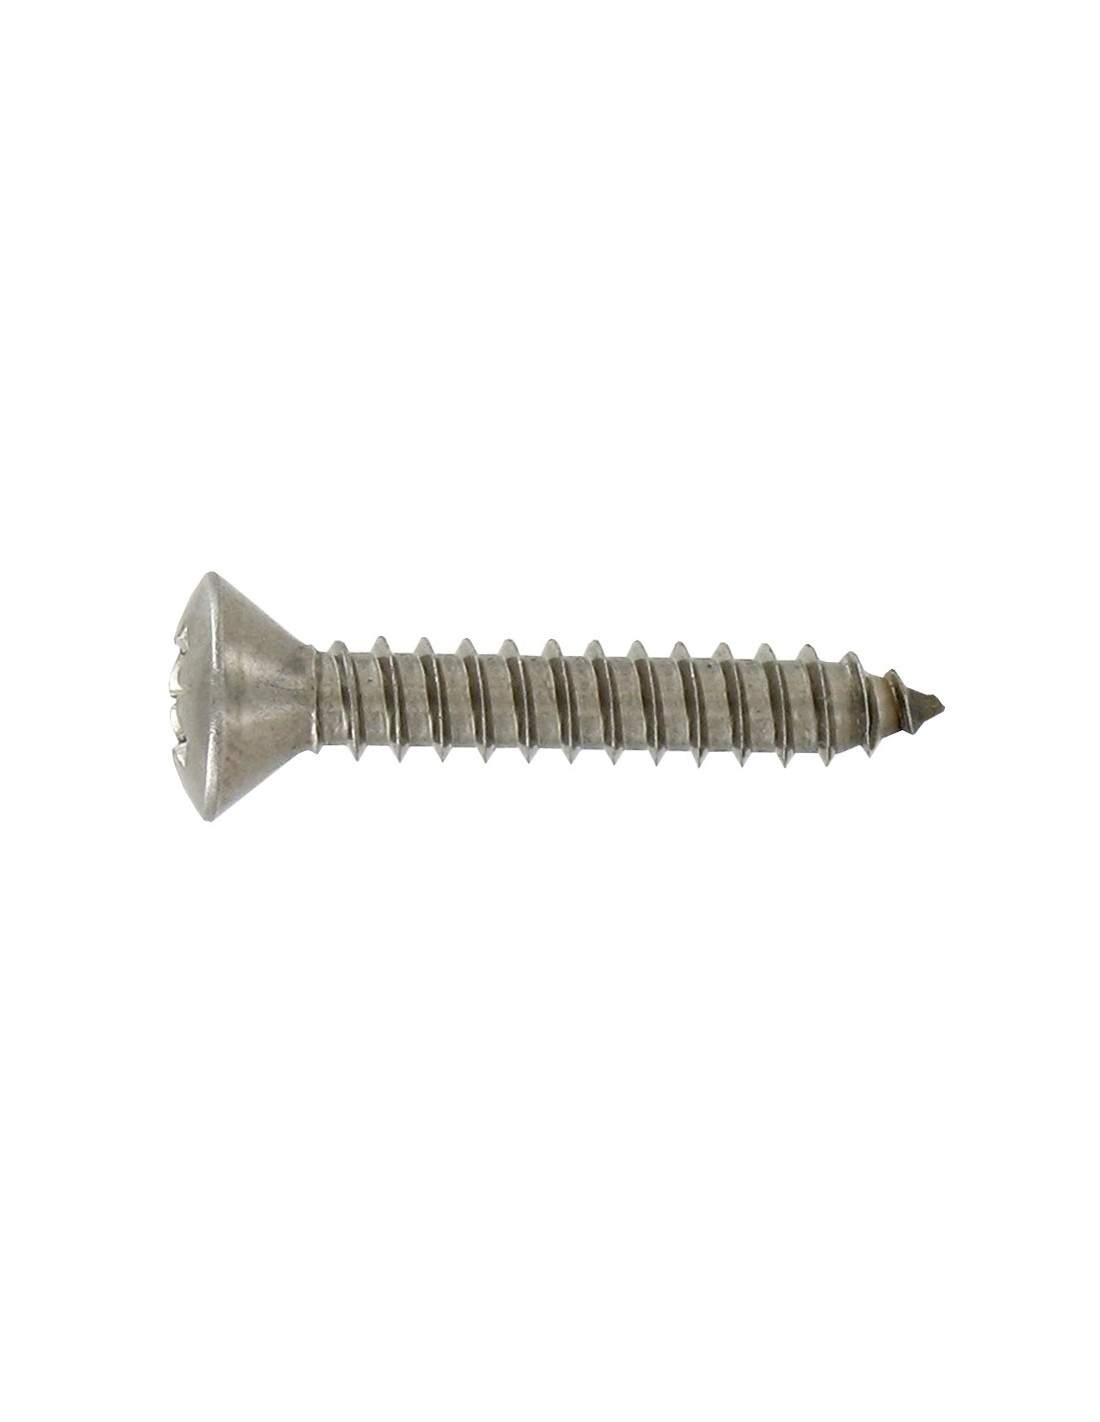 Countersunk-head tapping screw, stainless steel A4 3.5x13, 26 pcs.